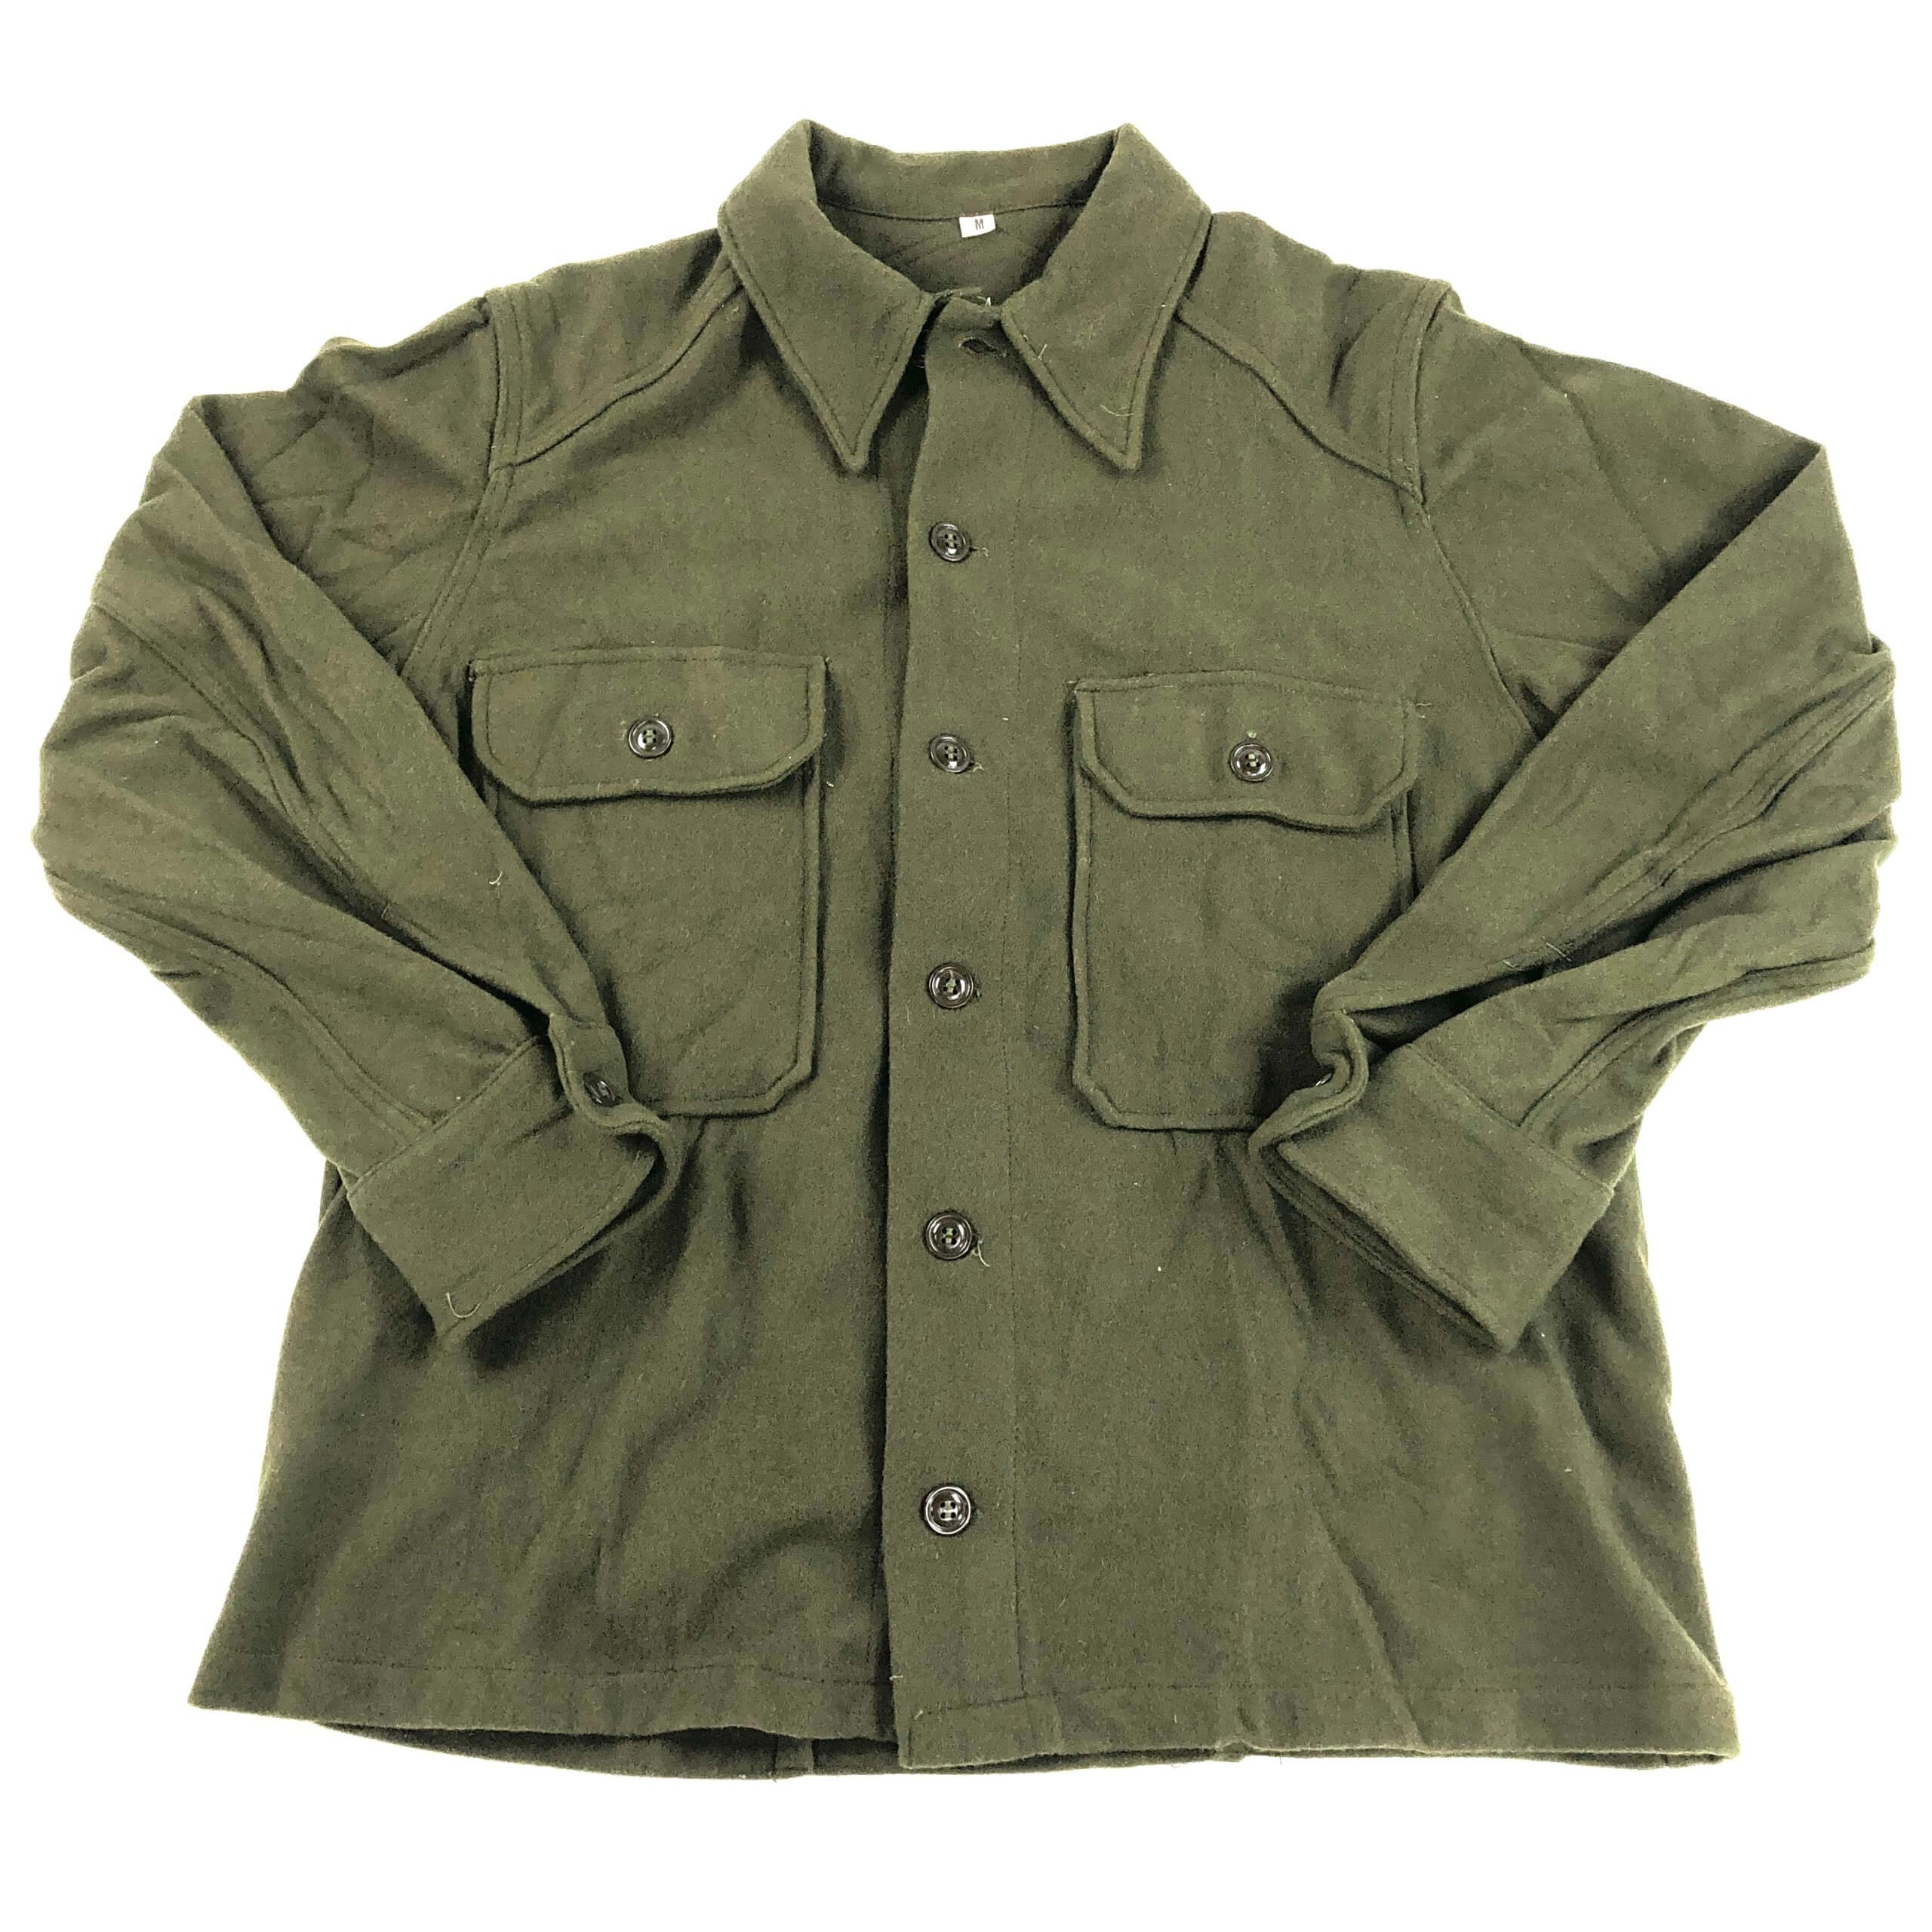 Genuine US Military WOOL FIELD SHIRT Cold Weather Winter Hunting SMALL VGC 